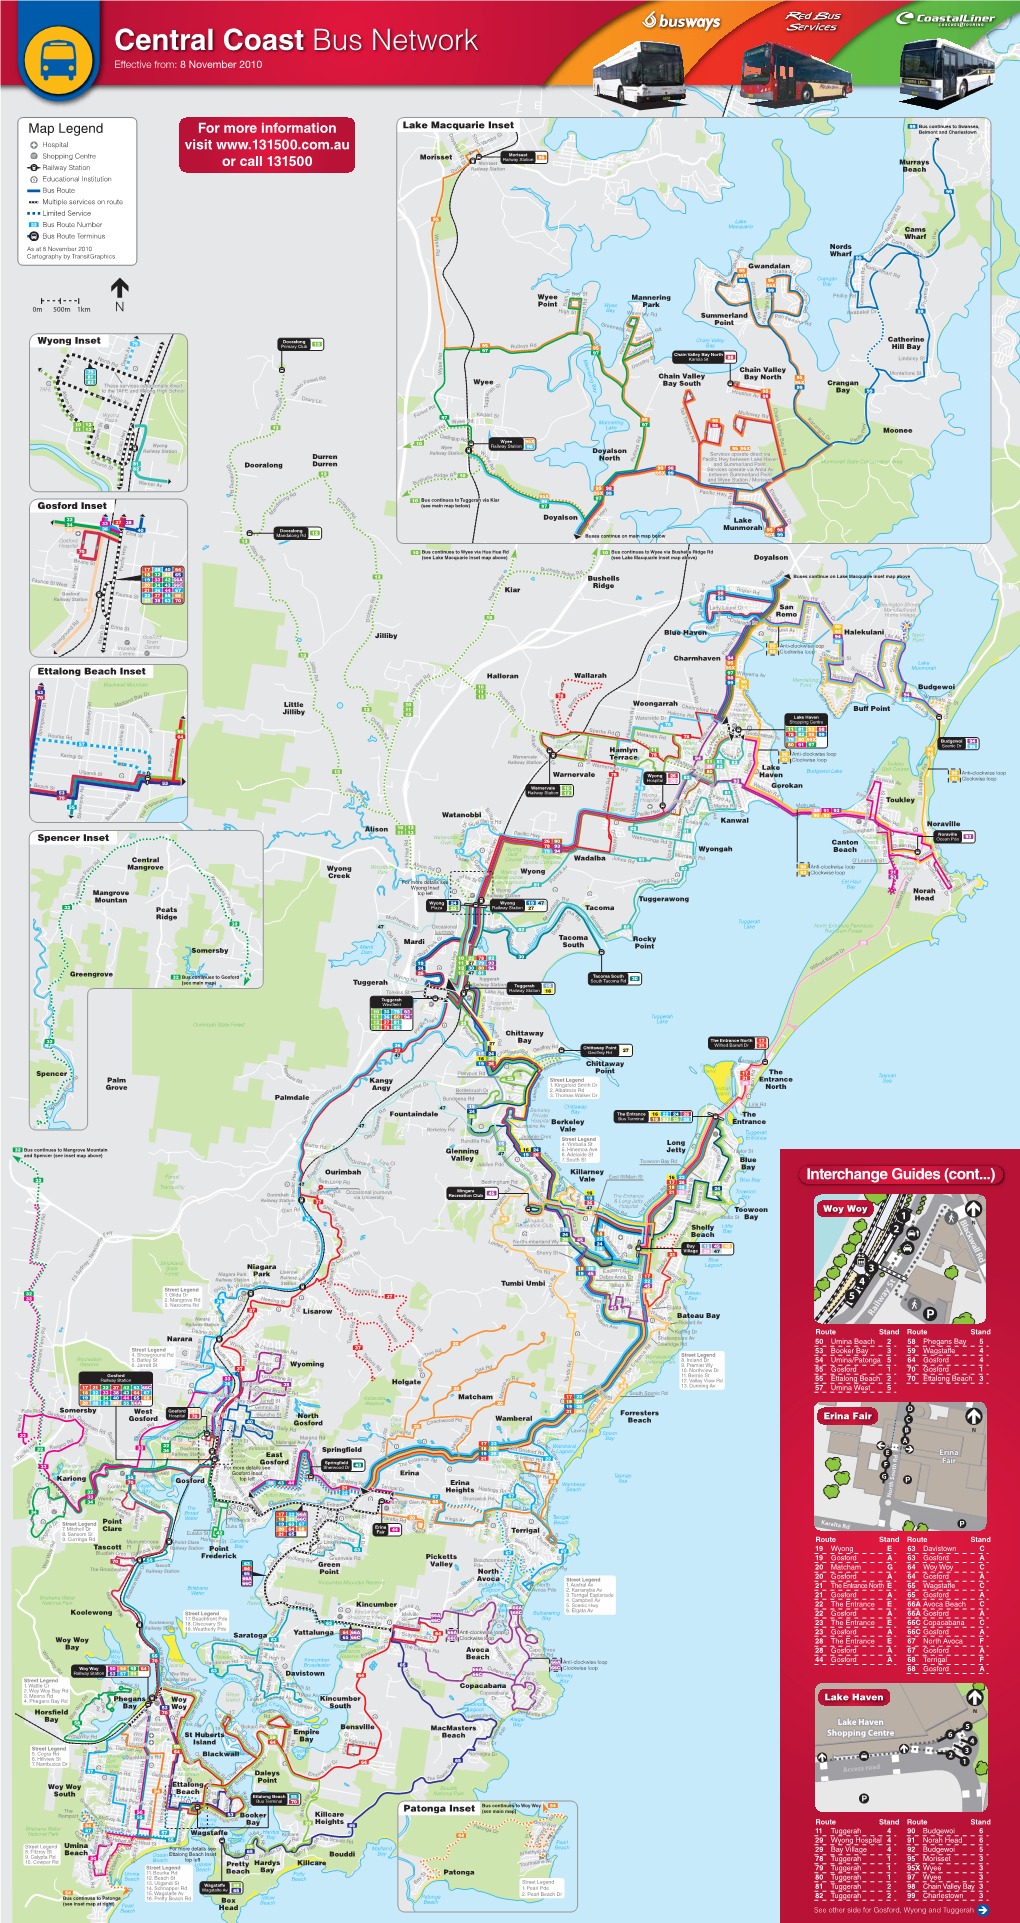 Central Coast Bus Network Effective From: 8 November 2010